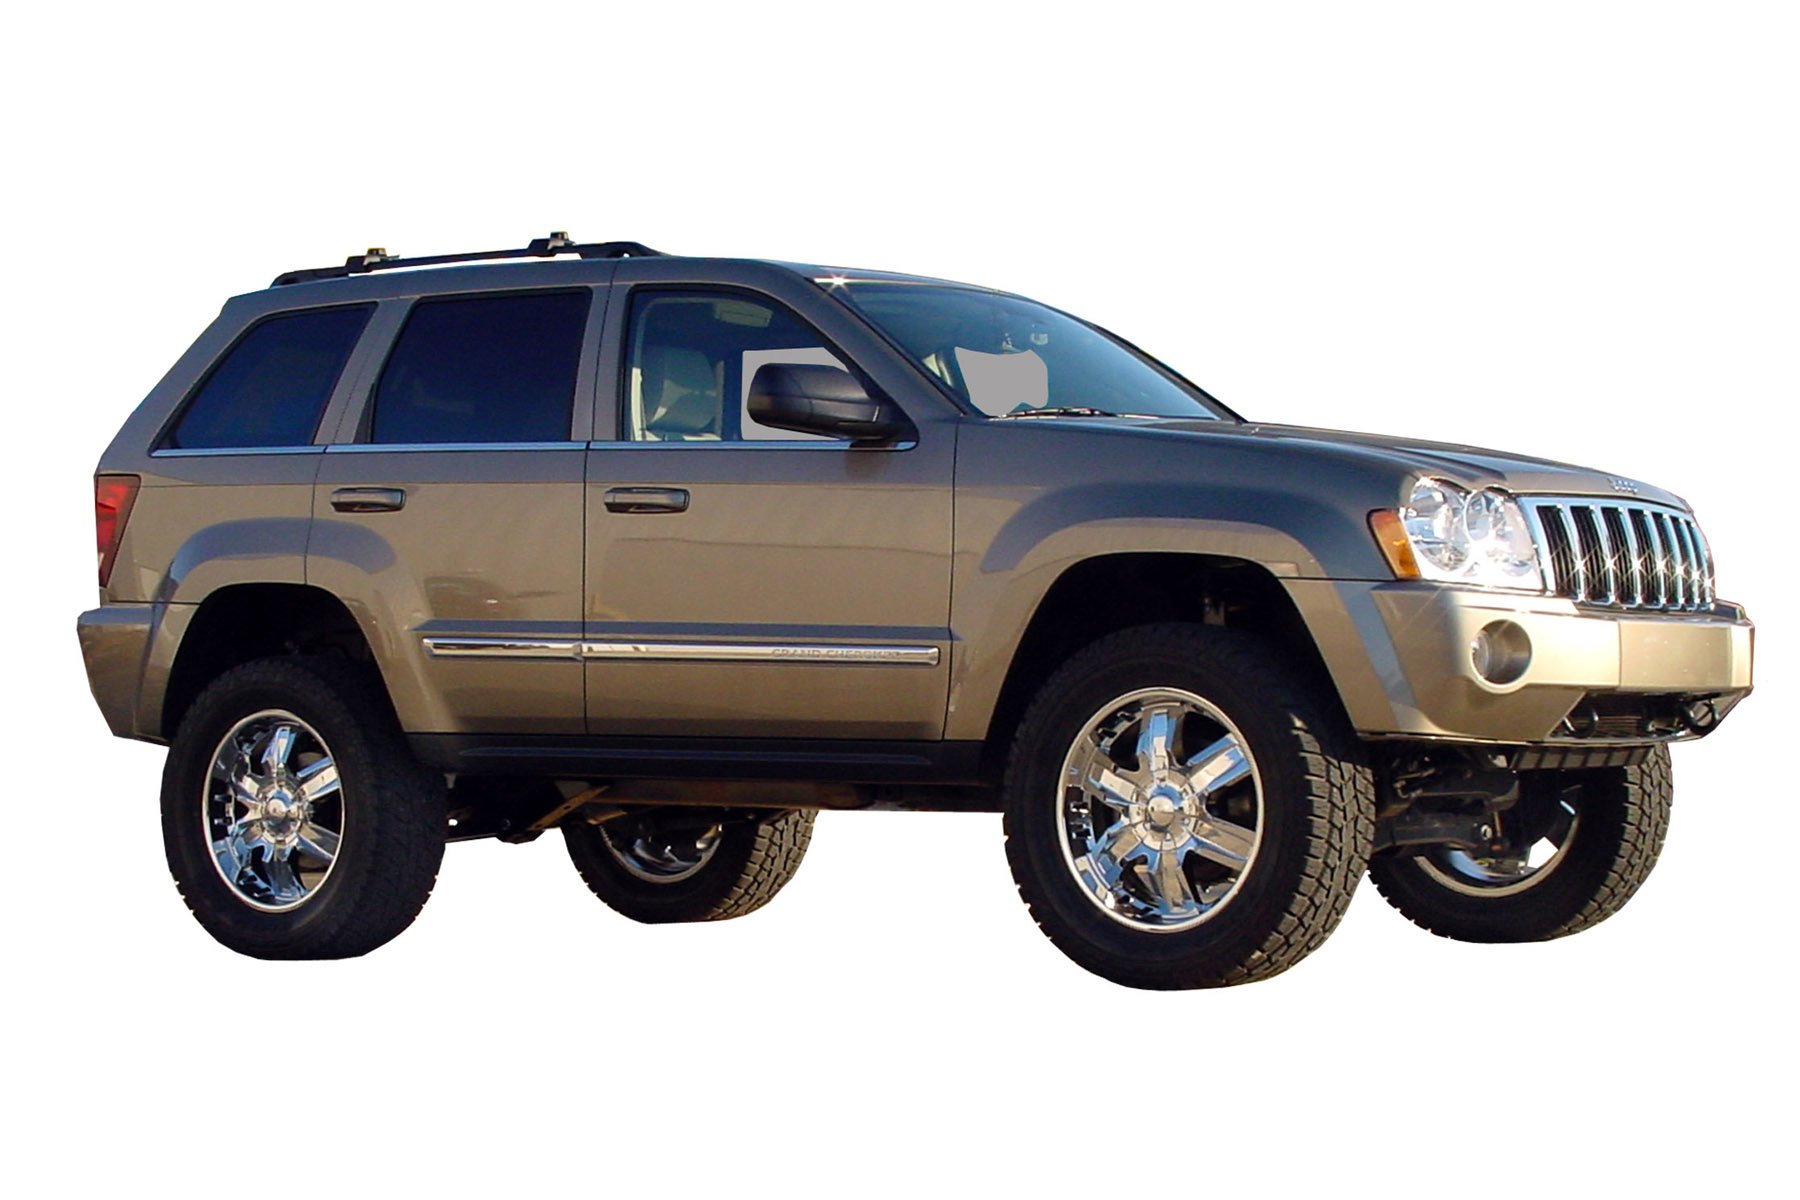 Superlift K864 4" Lift Kit for 05-07 Jeep Grand Cherokee WK & Commander XK  with 4WD | Quadratec